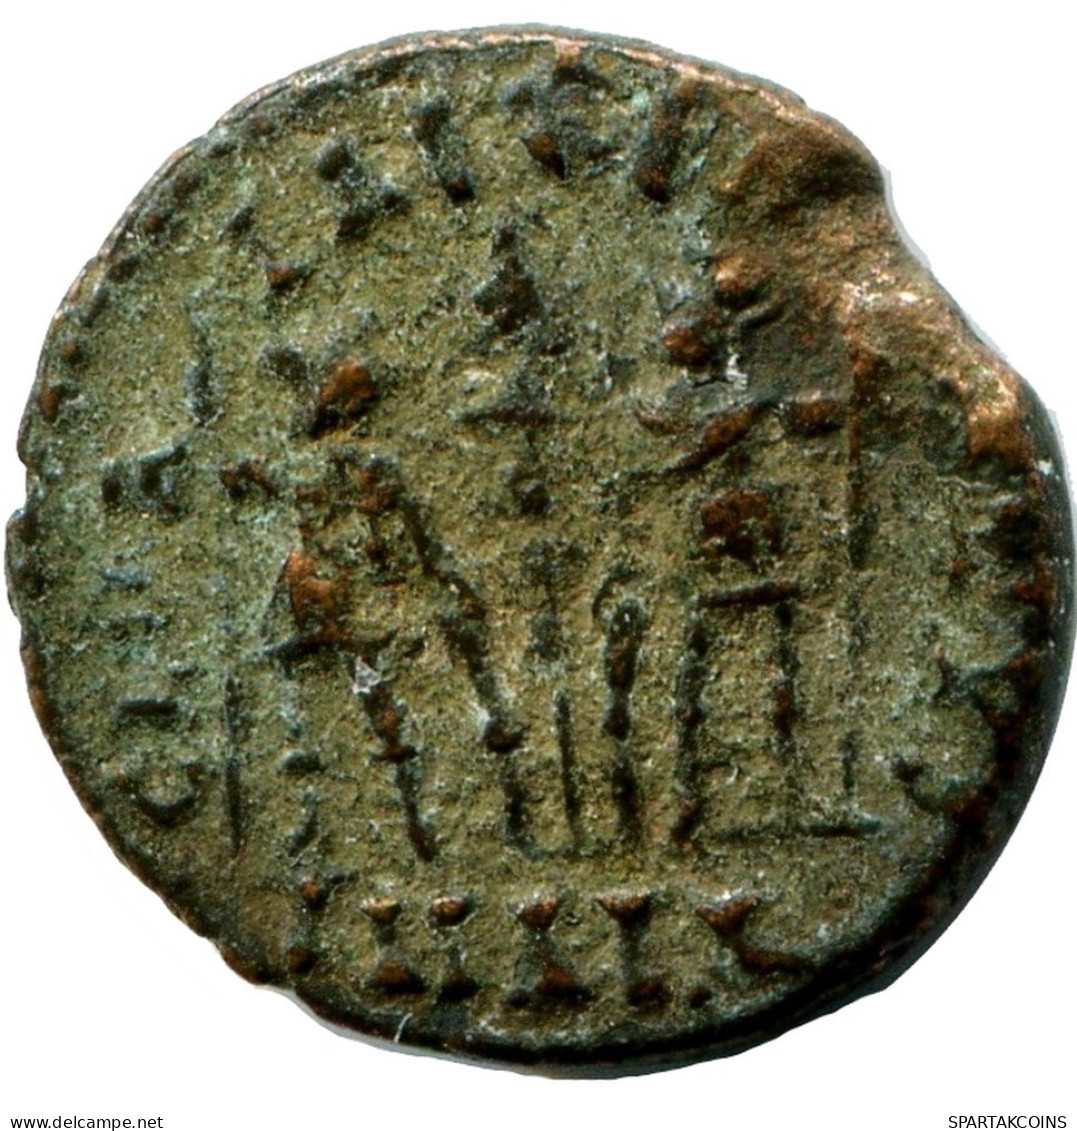 CONSTANS MINTED IN ALEKSANDRIA FOUND IN IHNASYAH HOARD EGYPT #ANC11470.14.D.A - El Imperio Christiano (307 / 363)